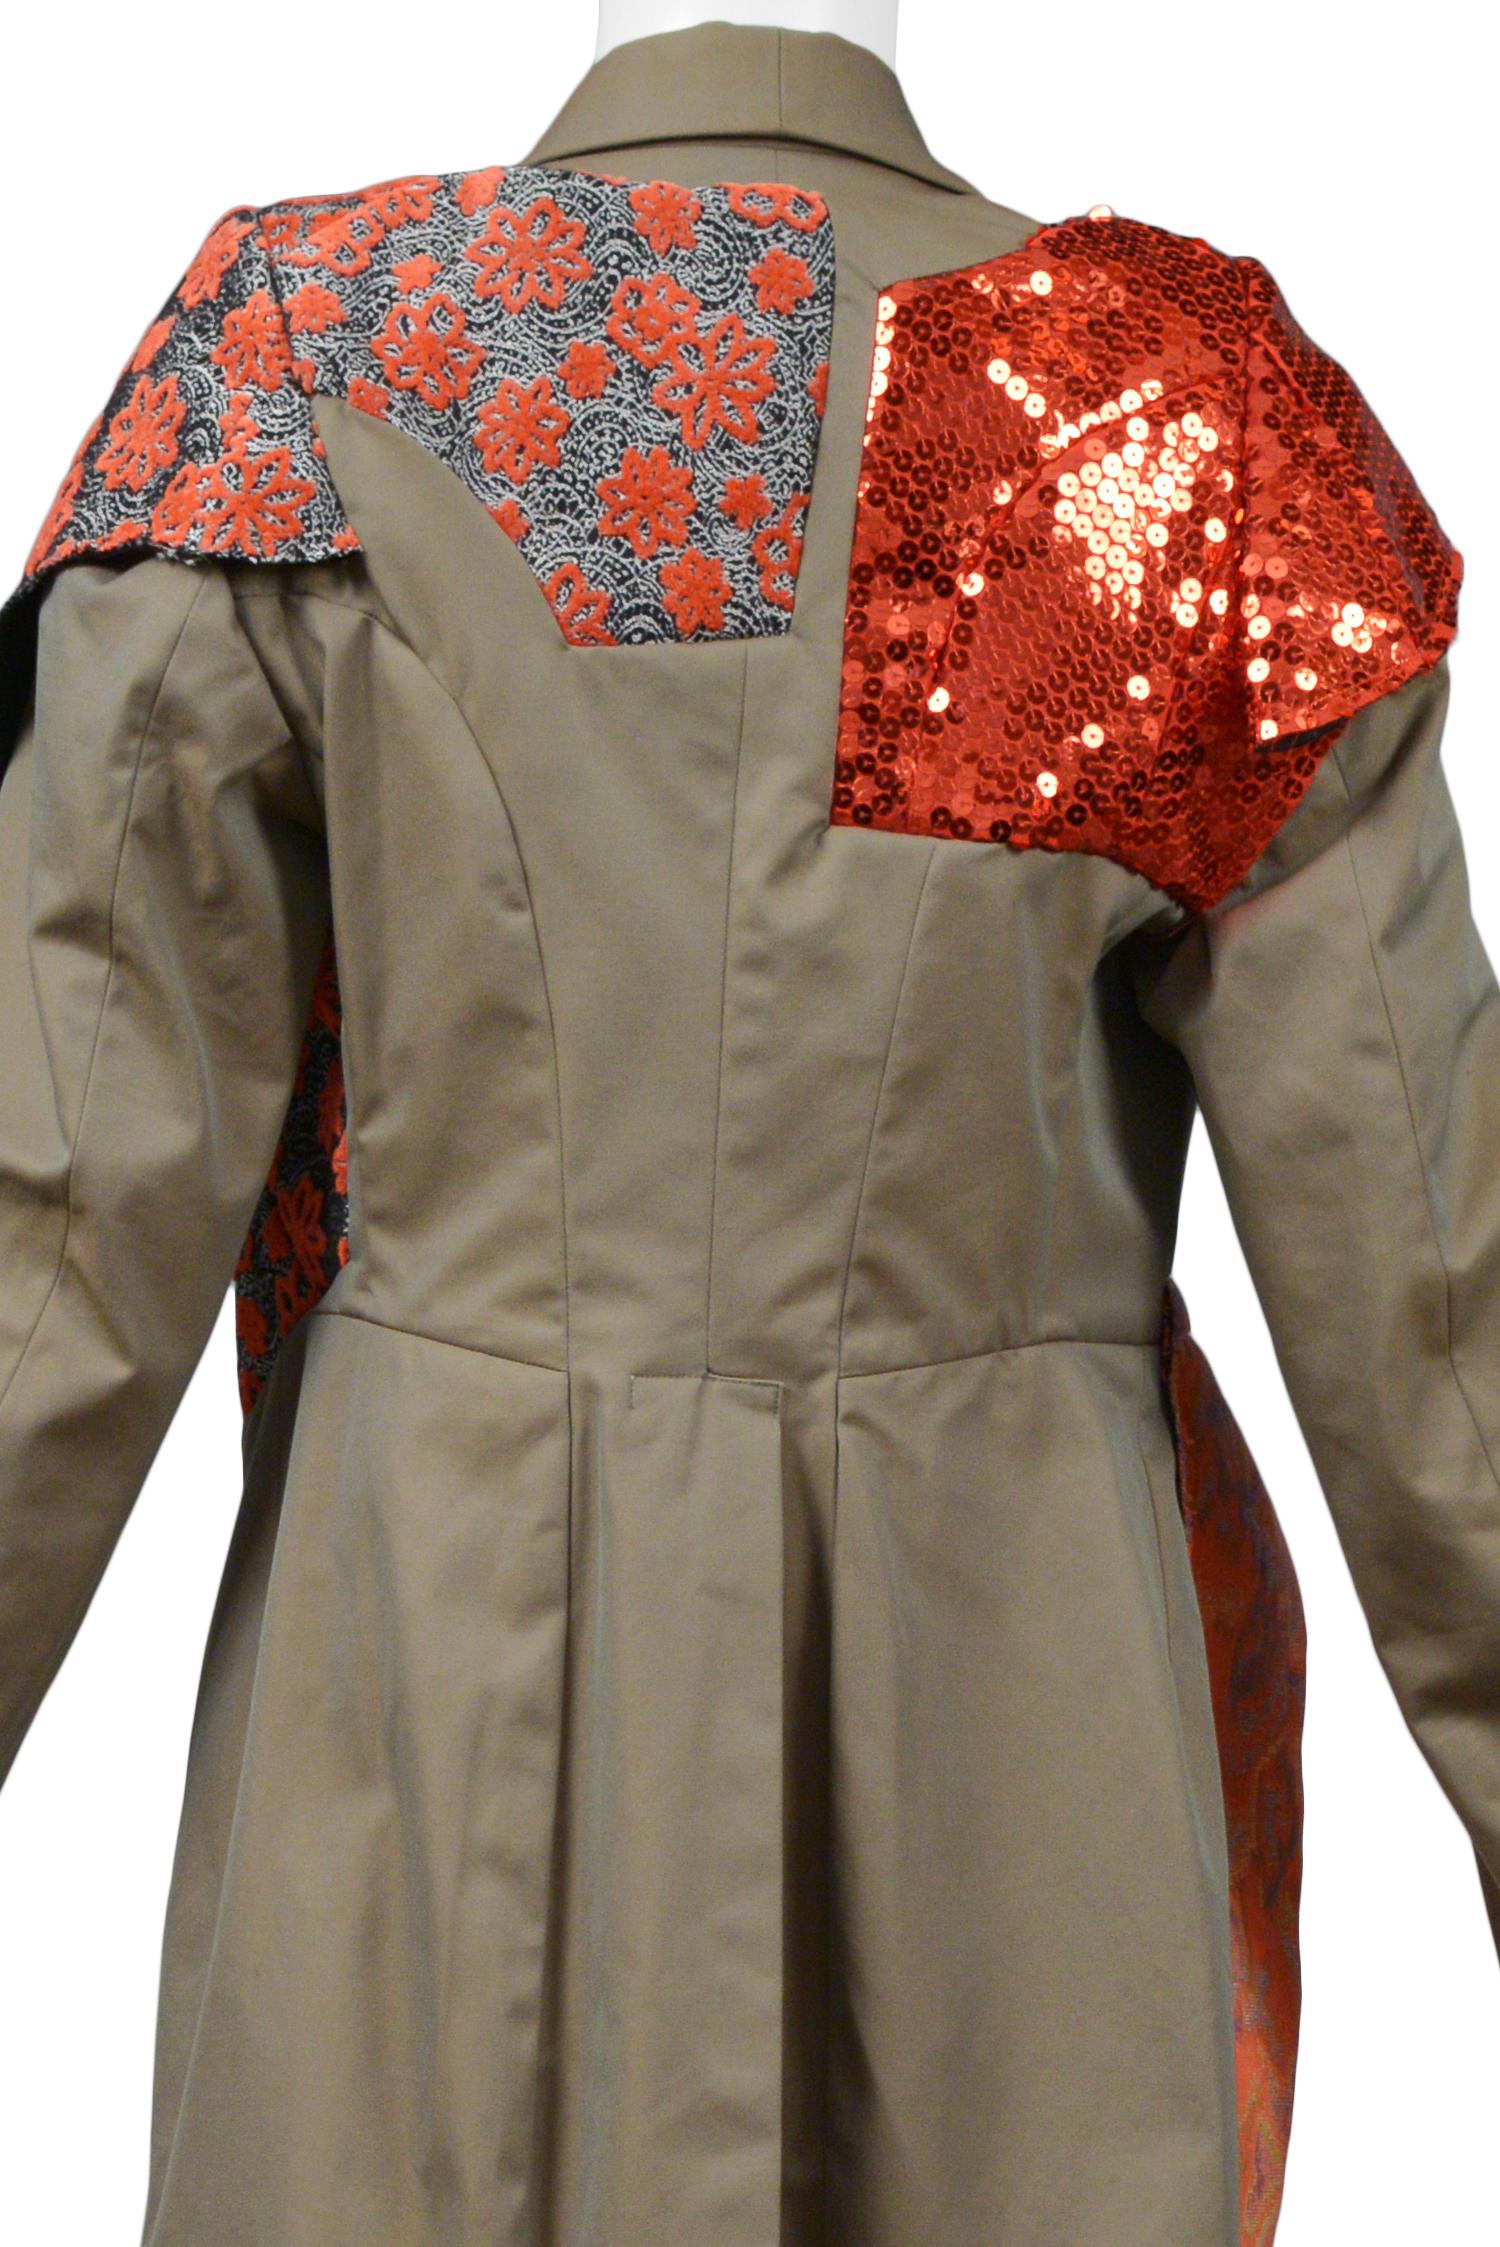 Comme des Garcons Olive Jacket With Red Sequins & Brocade 2010 In Excellent Condition For Sale In Los Angeles, CA